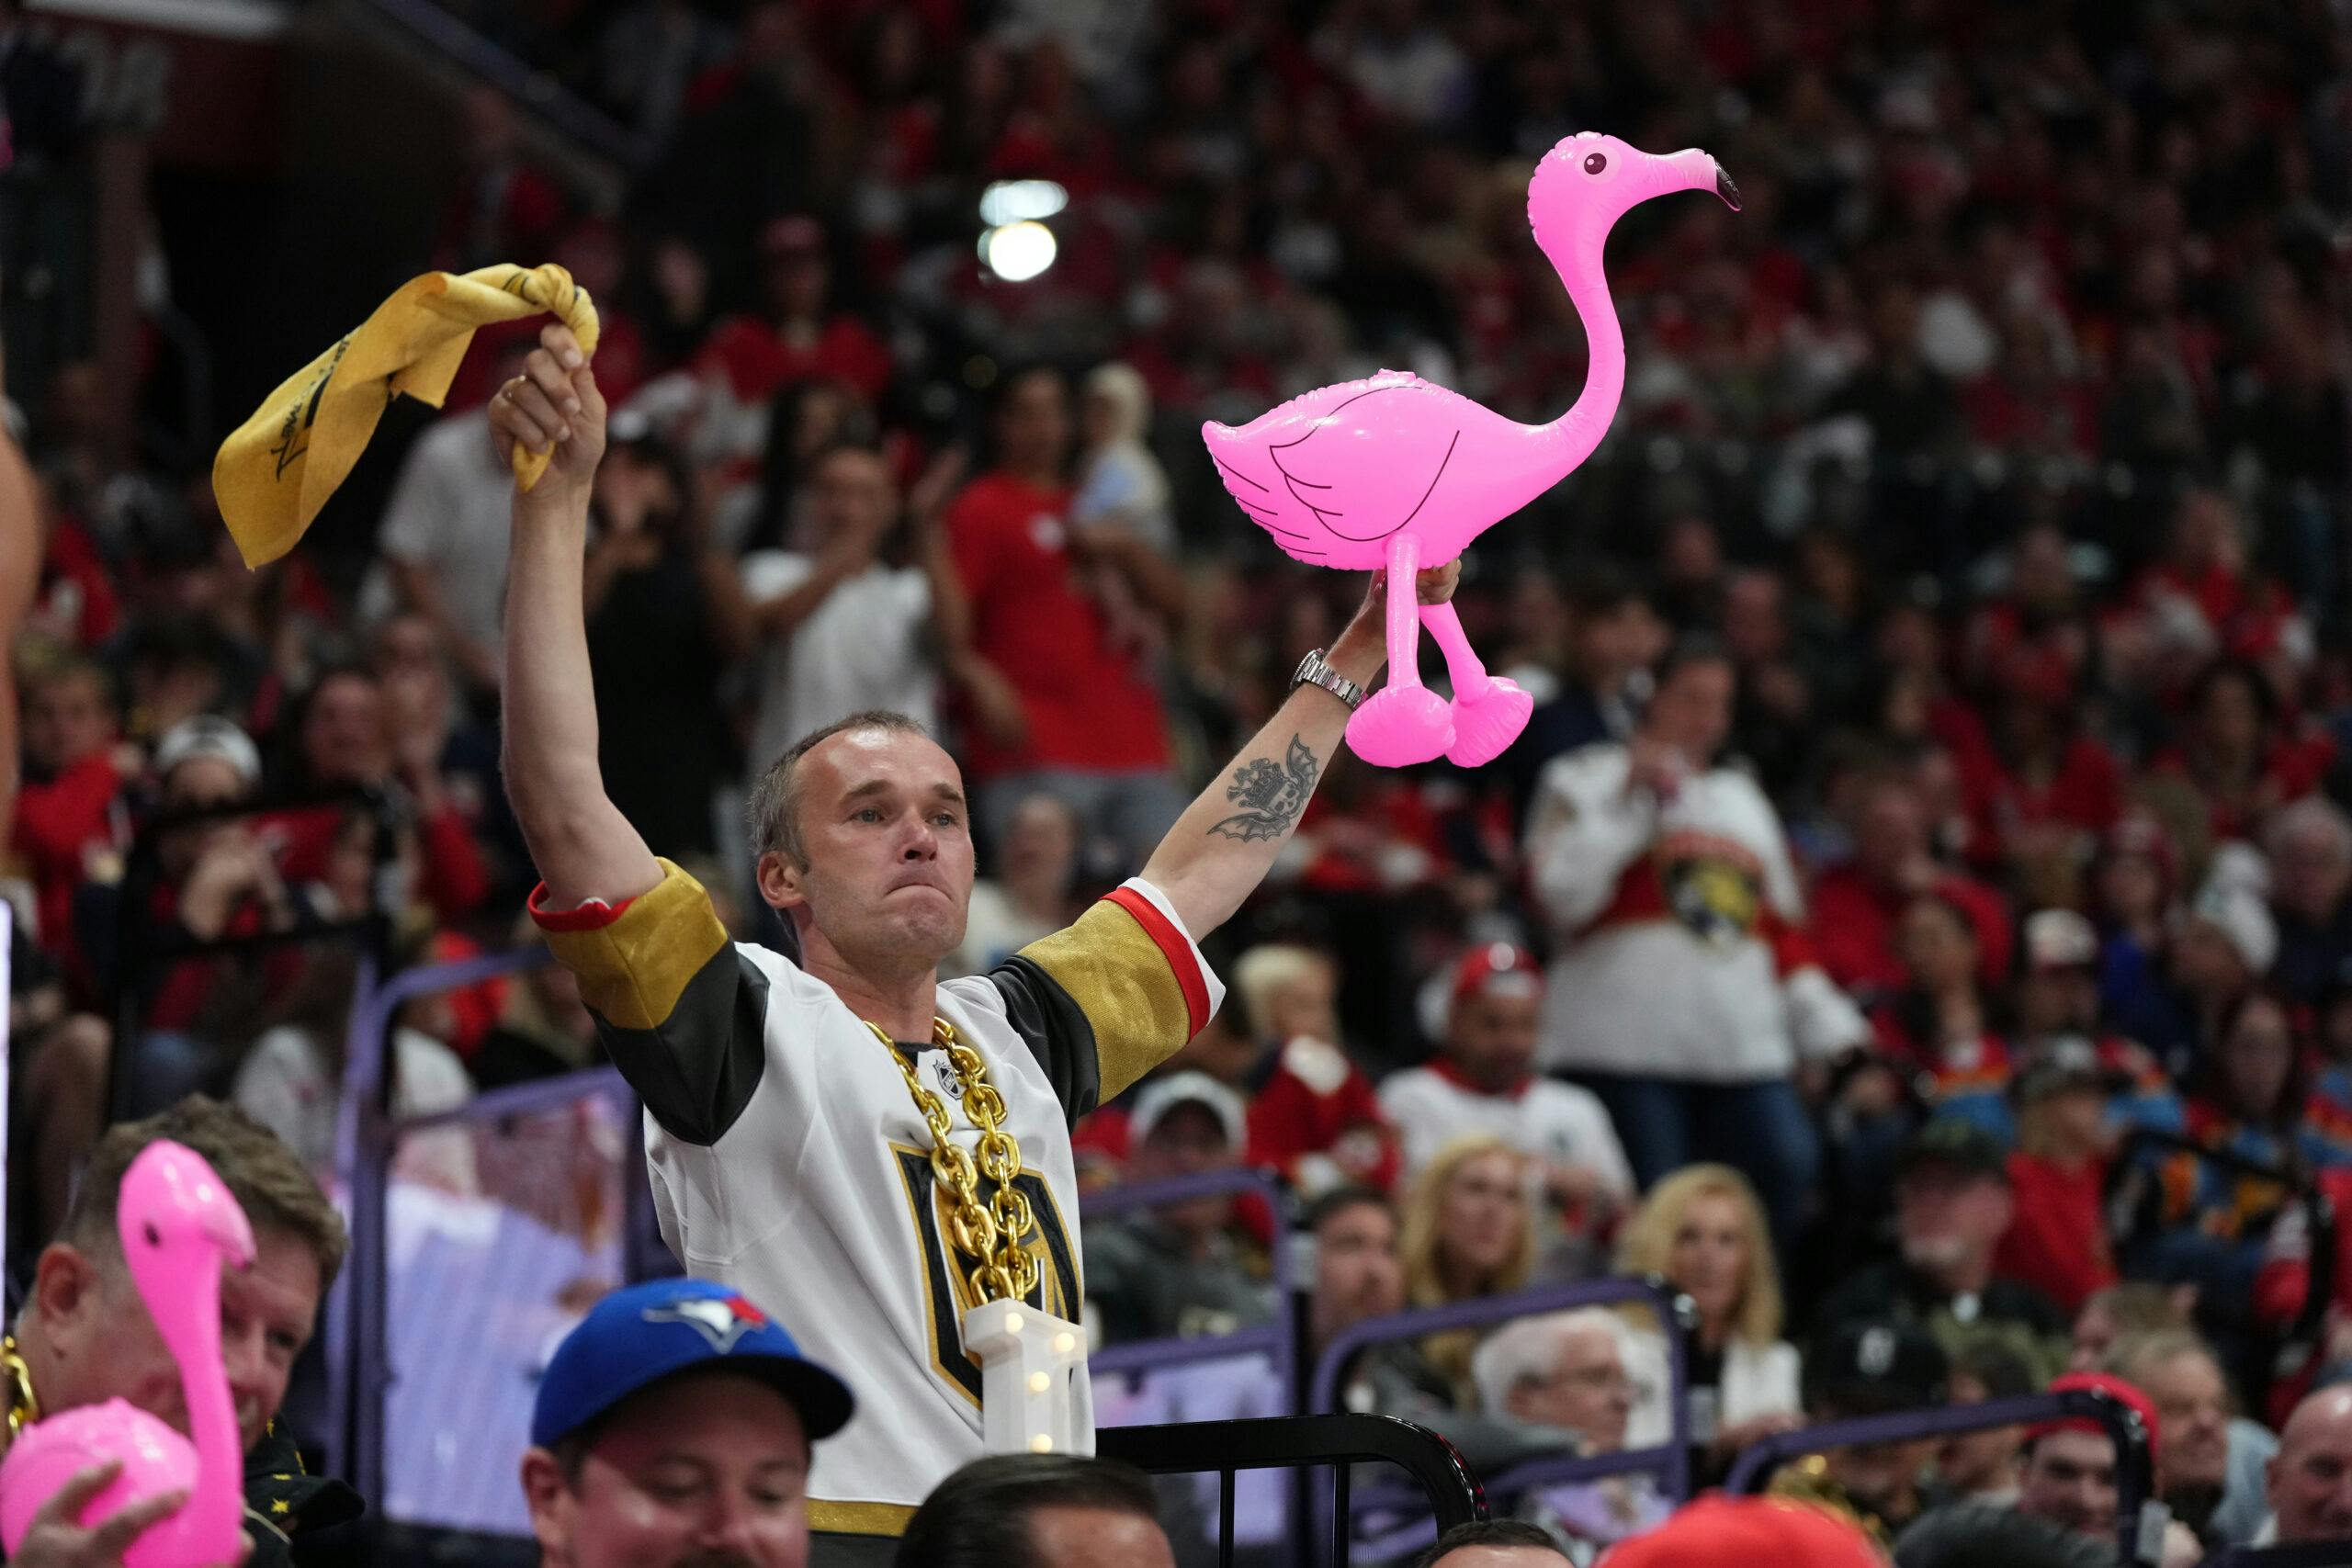 Most of US cheering for Golden Knights to win Stanley Cup Final